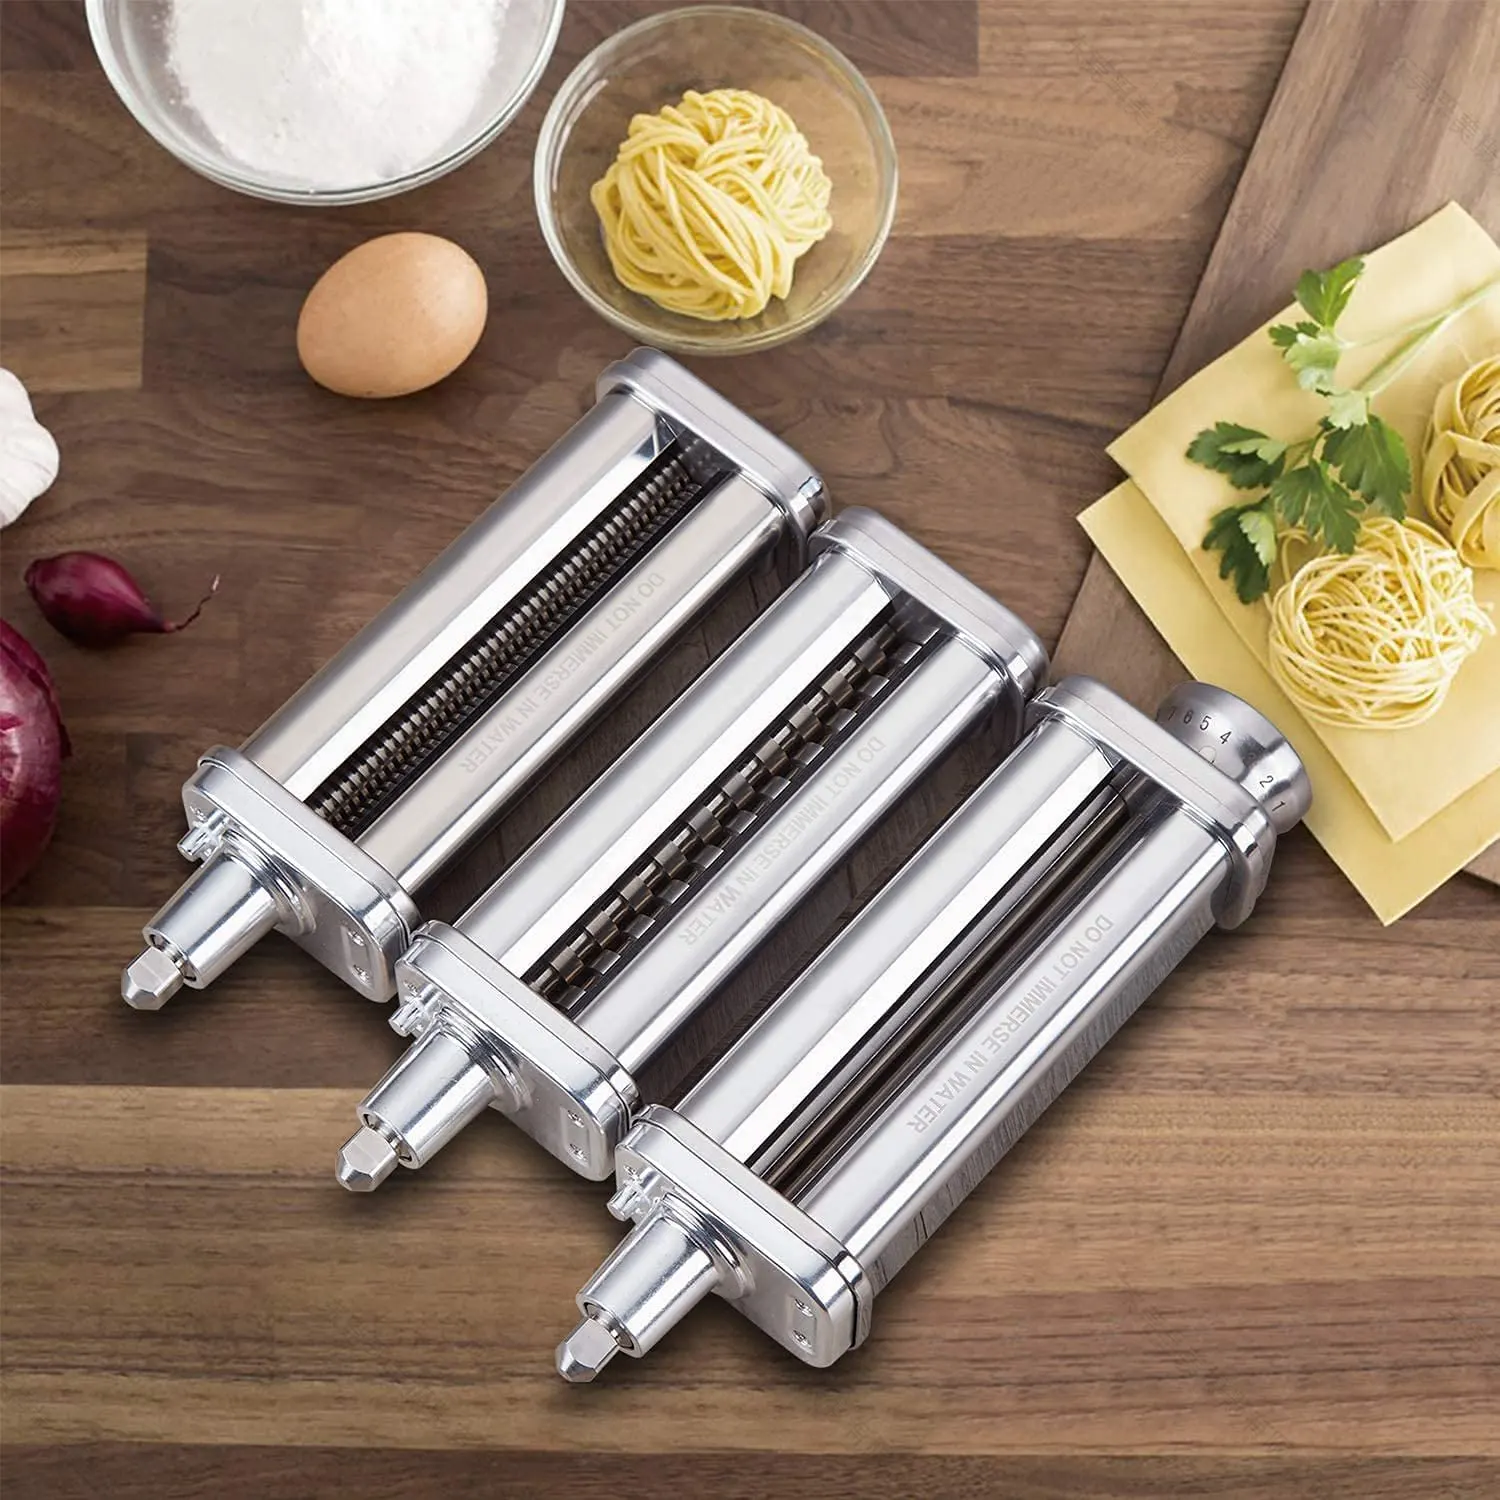 Kichood Pasta Attachment for Kitchen and Stand Mixers